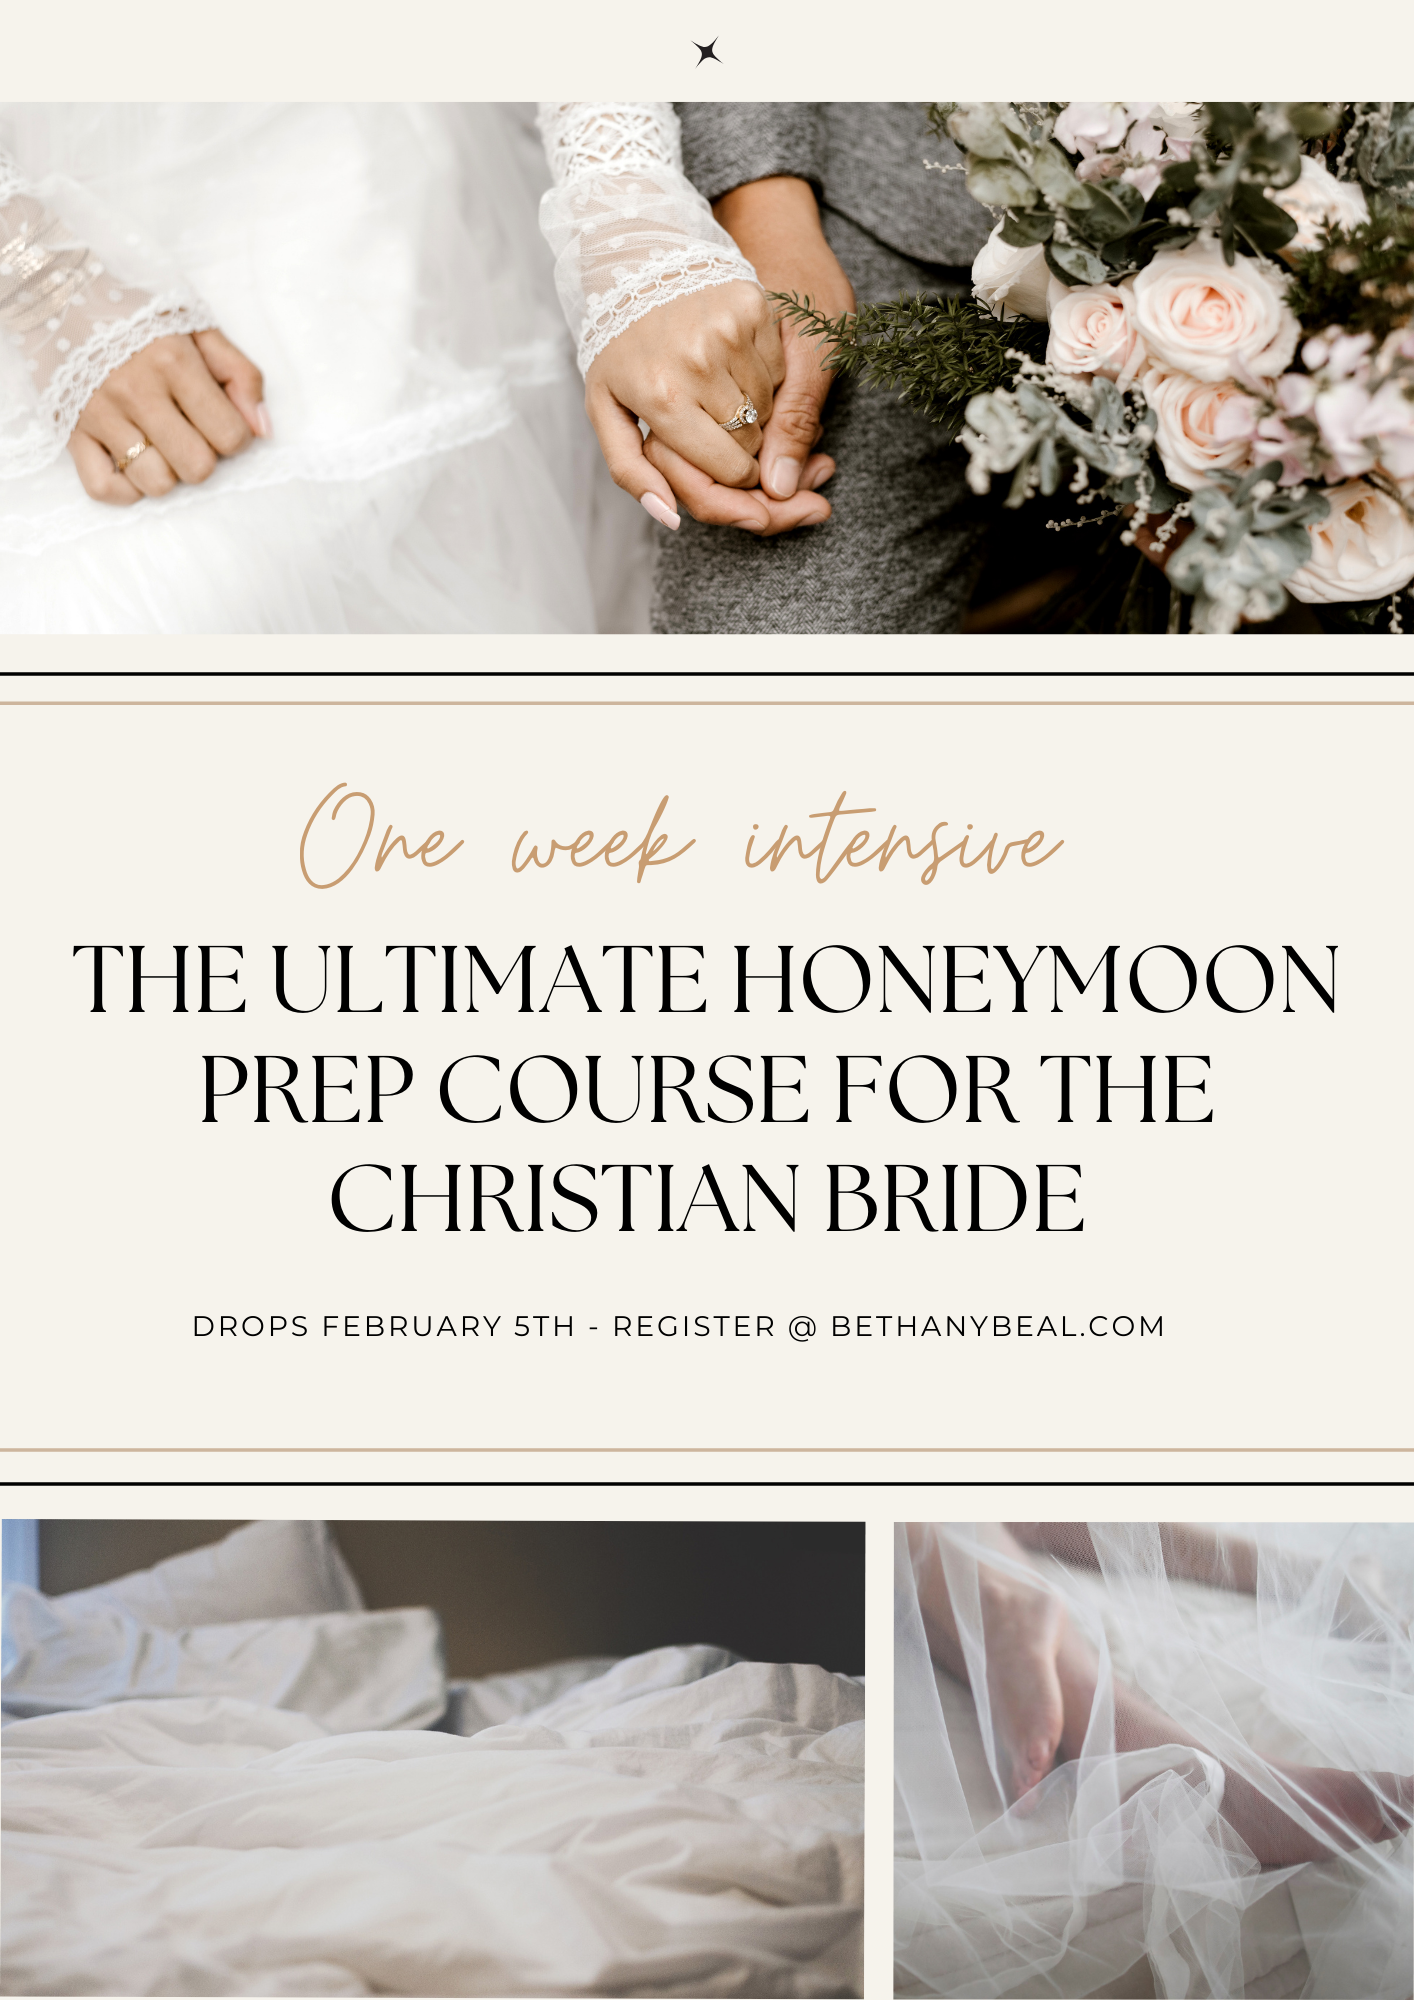 The Ultimate Honeymoon Prep Course for the Christian Bride